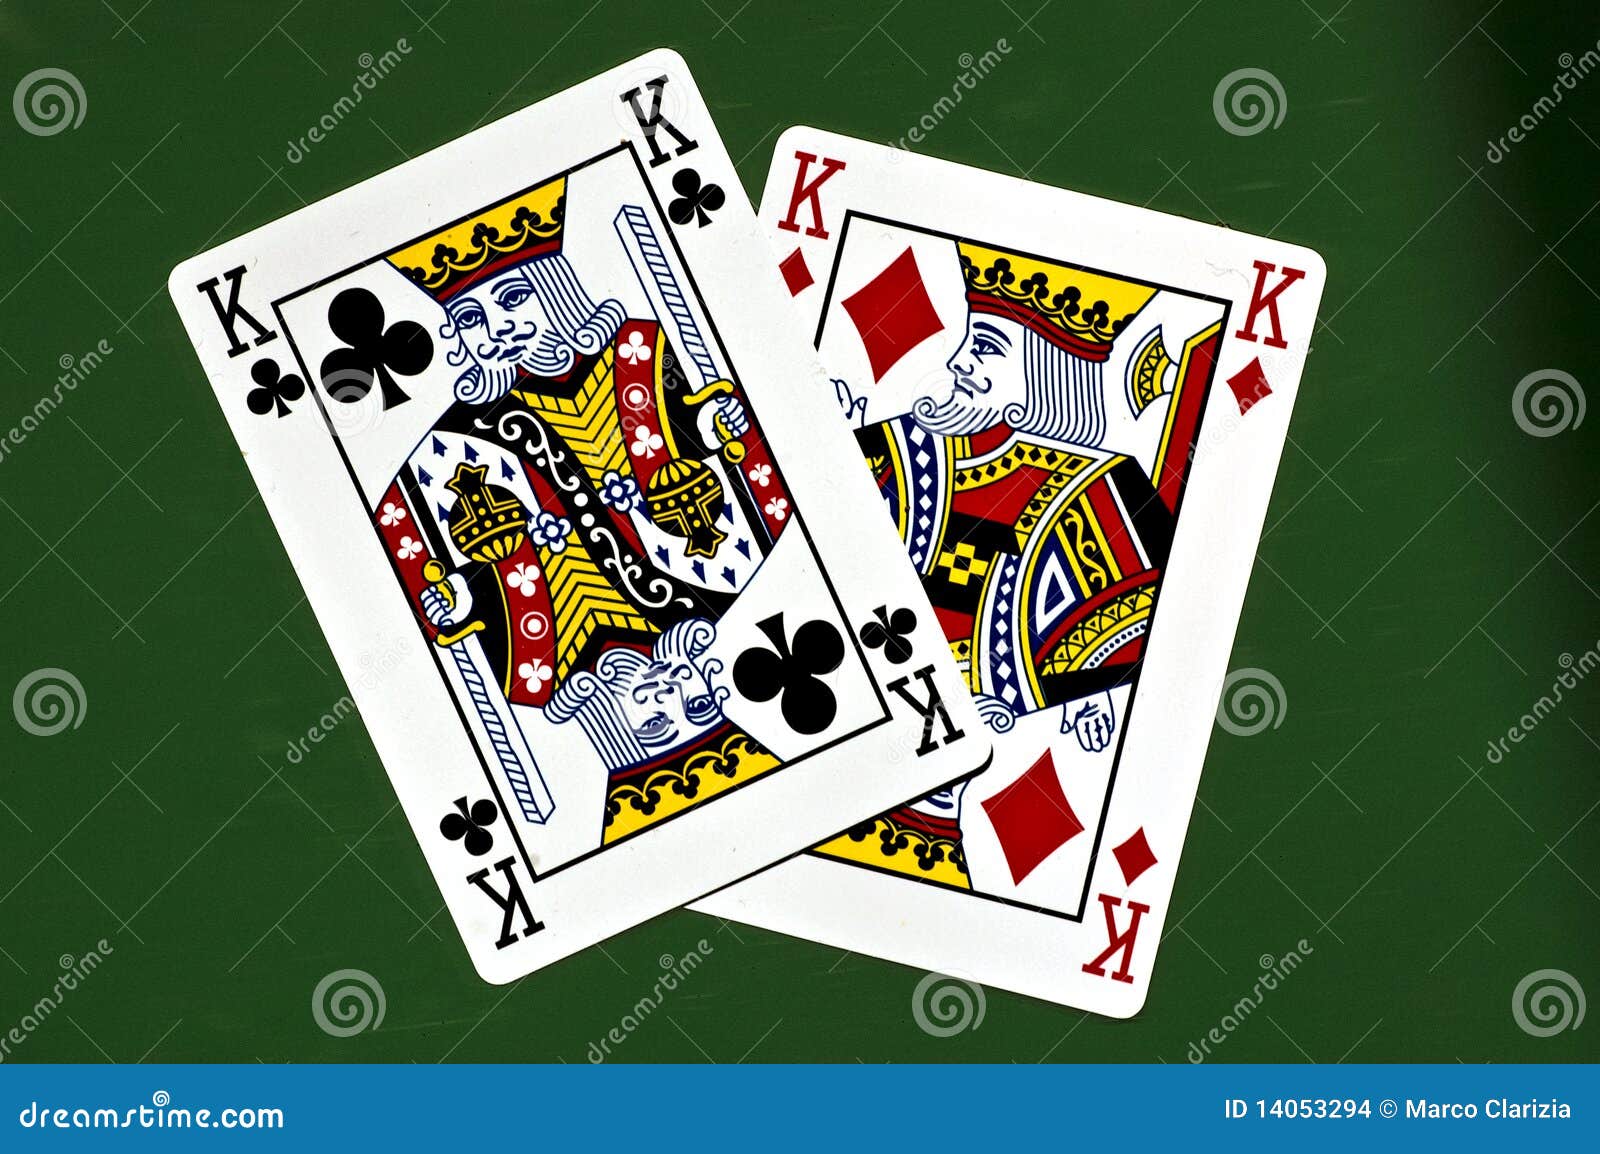 Hand in foreground holding pair of kings in poker Registraci slotozilla free slots slot machines